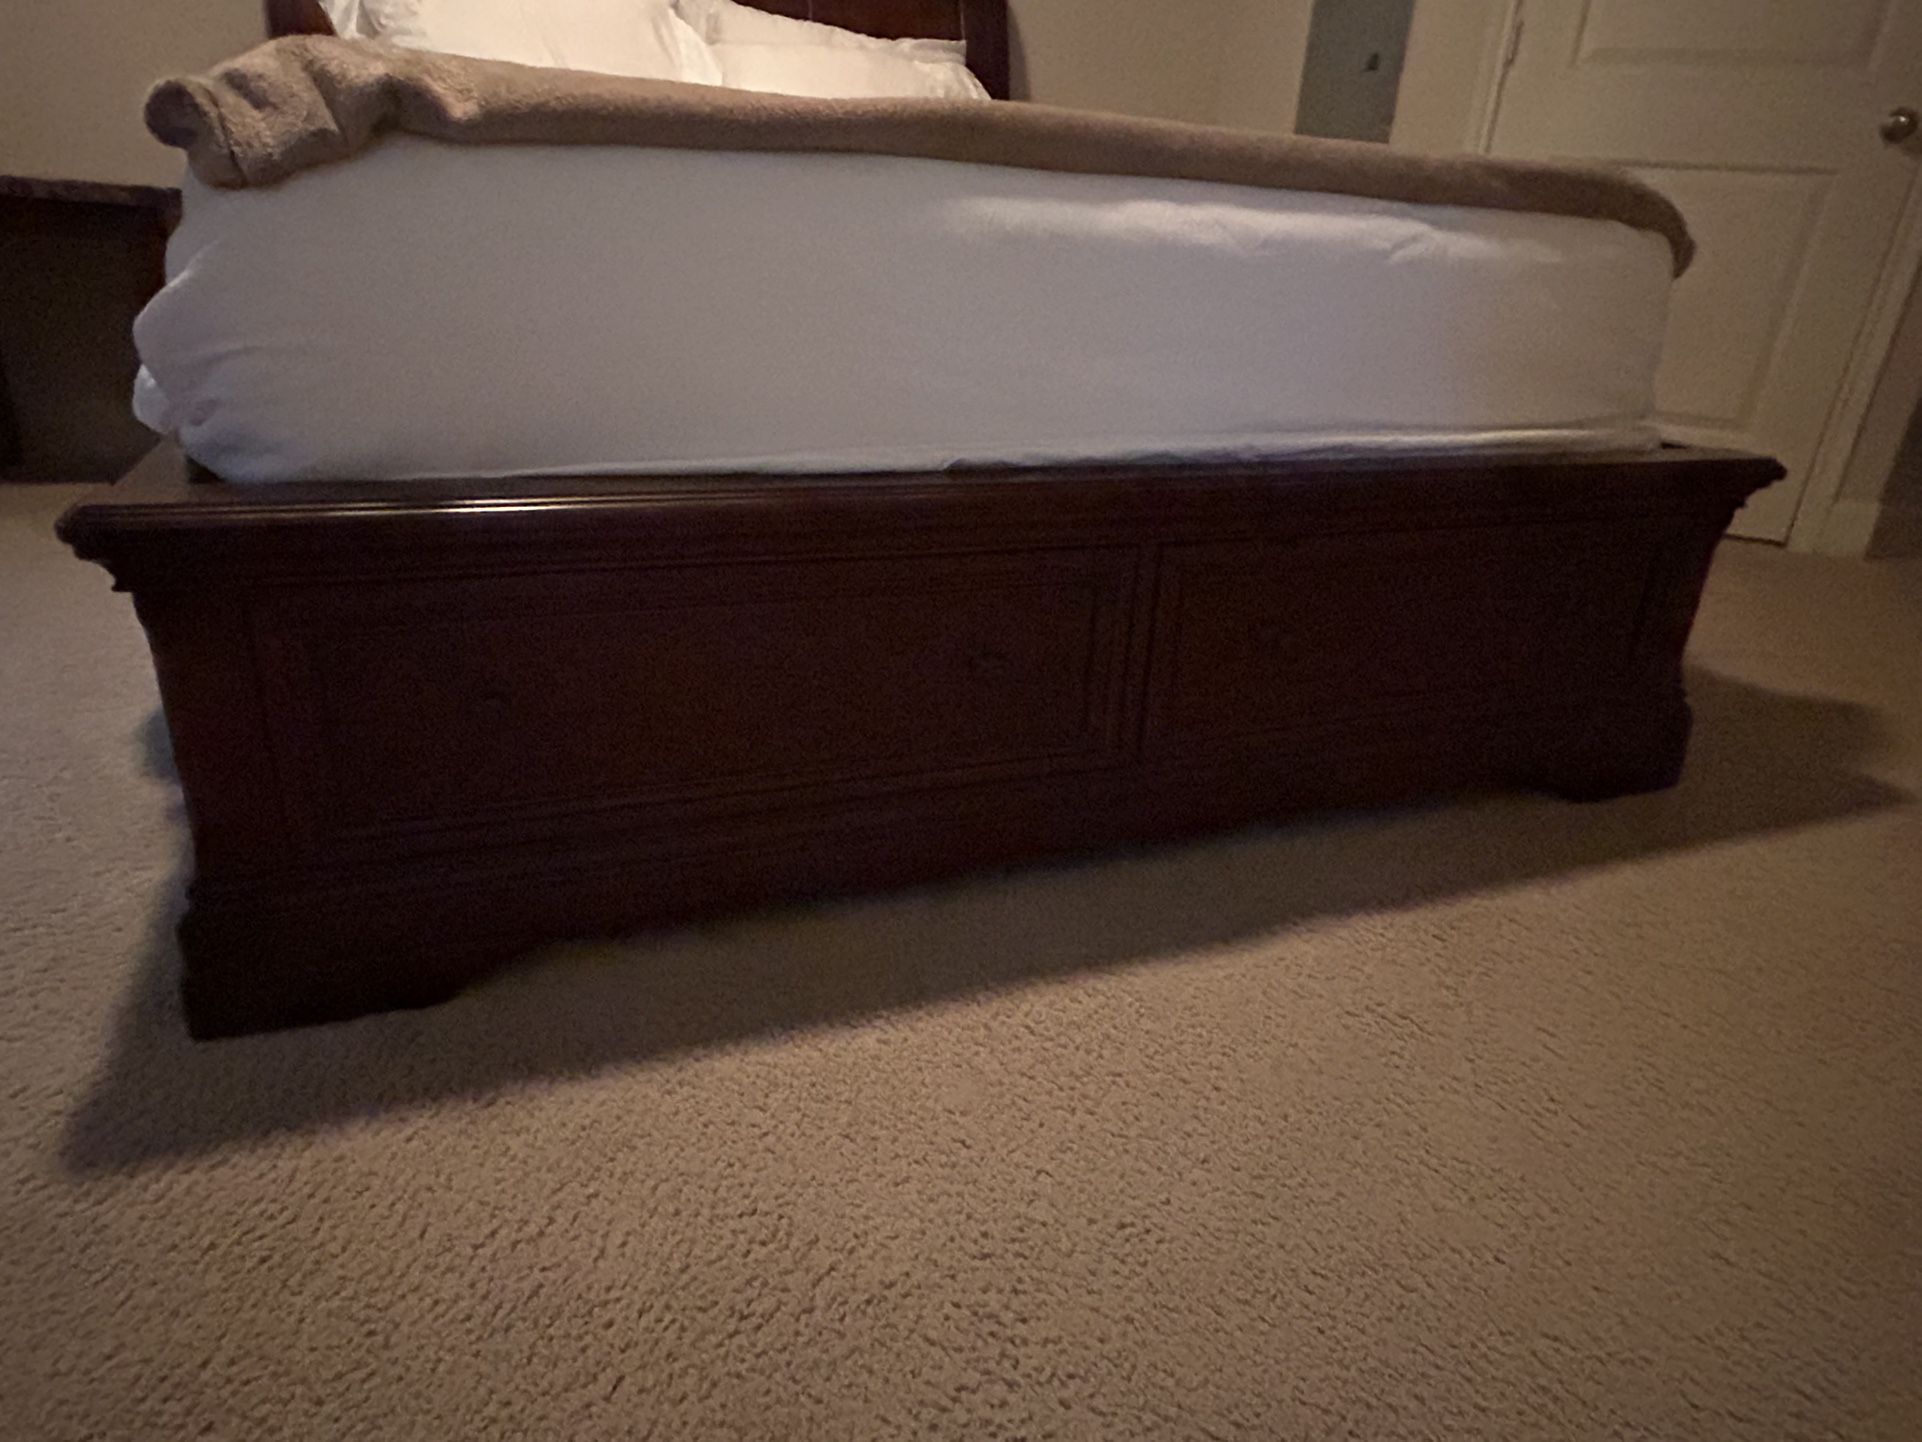 Queen Wood Bed Frame ( Mattress Not Included) No Check Payments Only Zelle Or Cash Please Only